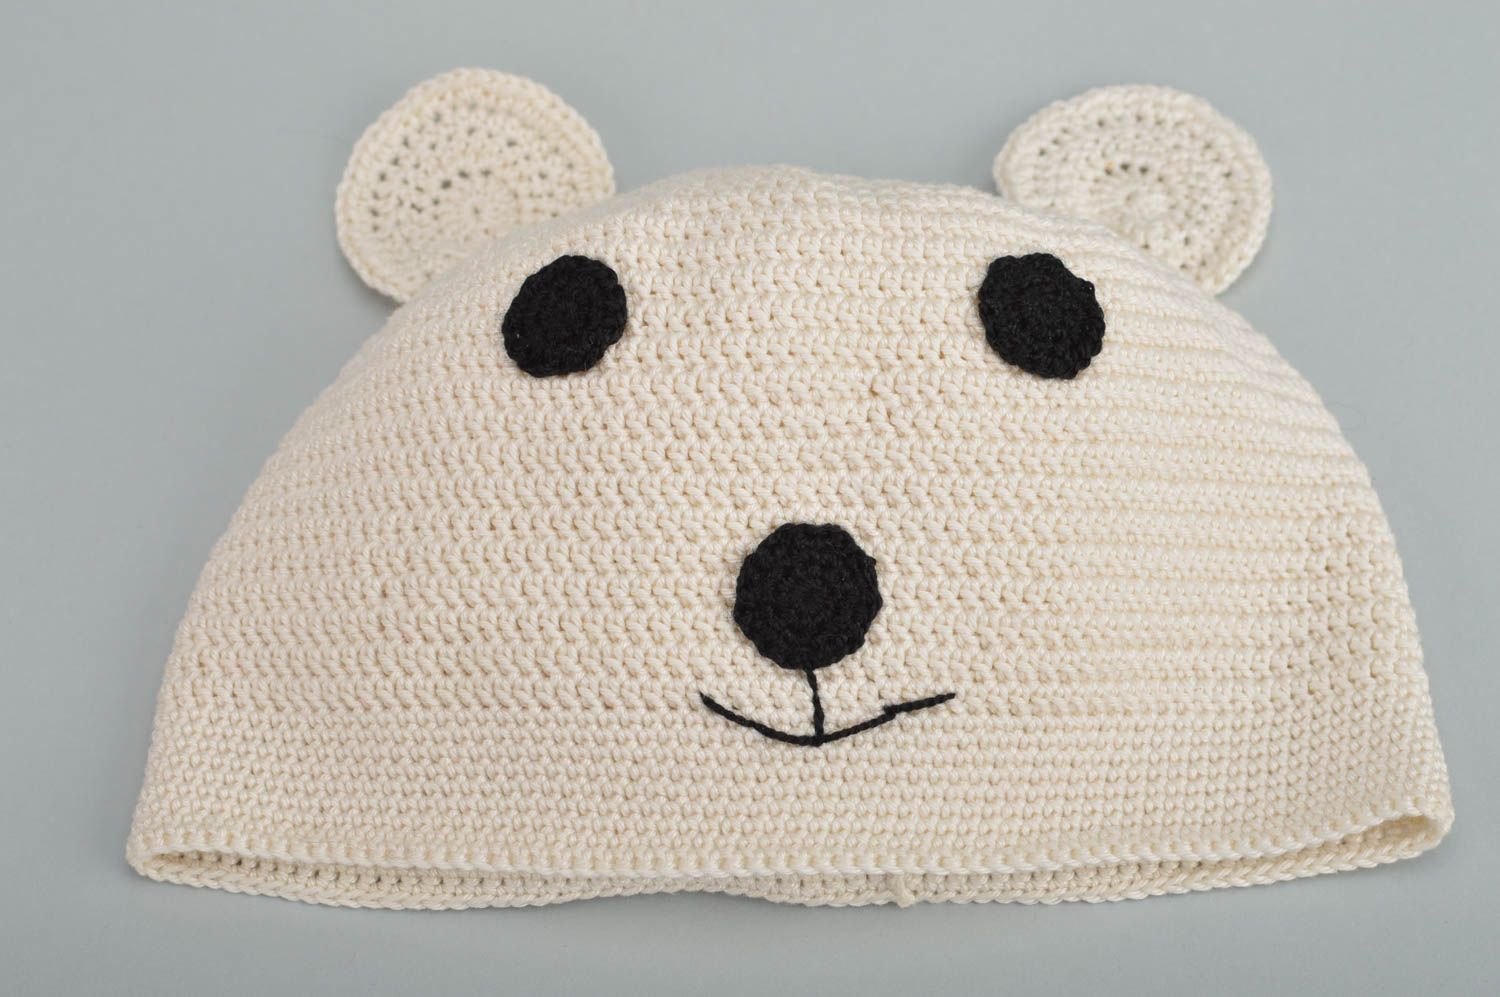 Handmade woven cap for kids in shape of bear with ears for boys and girls photo 2